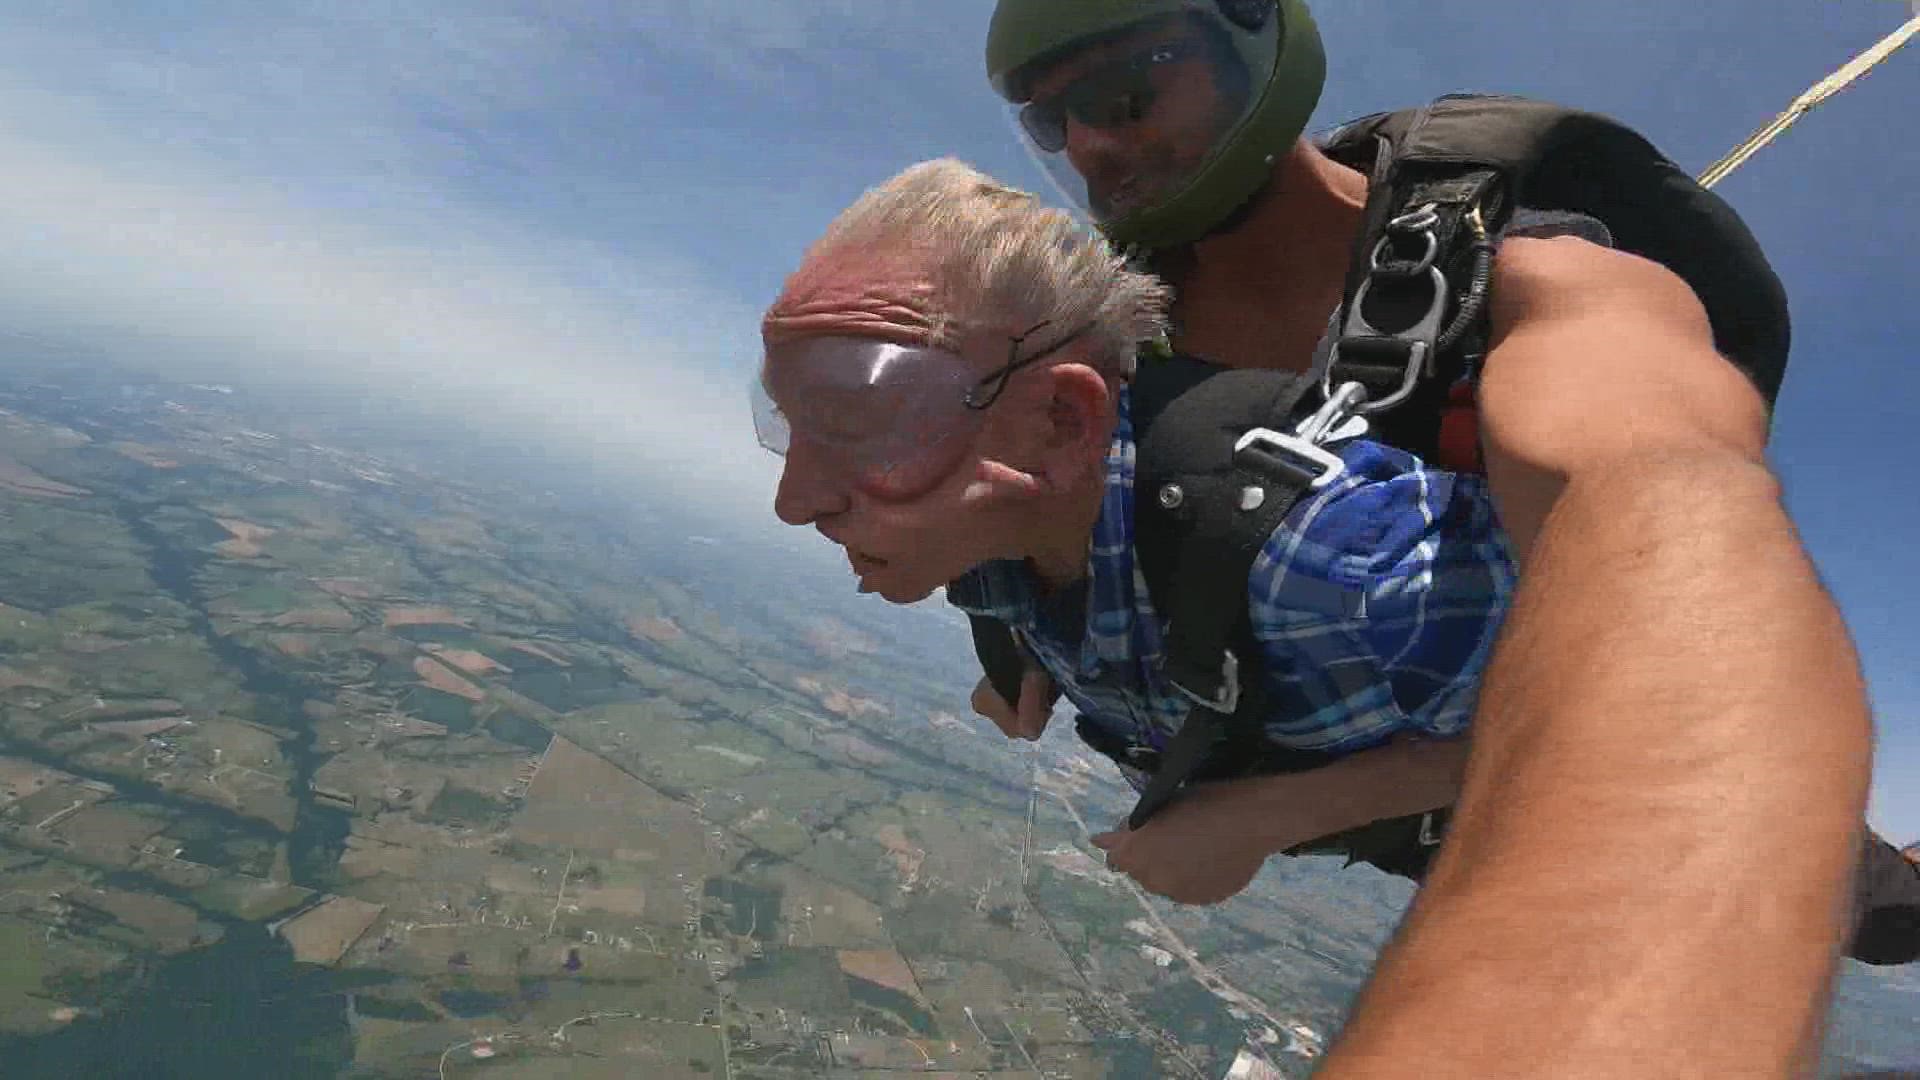 Ted Hunsberger hasn't been skydiving in more than 20 years. On Monday, he wasn't about to let being a septuagenarian stop him.